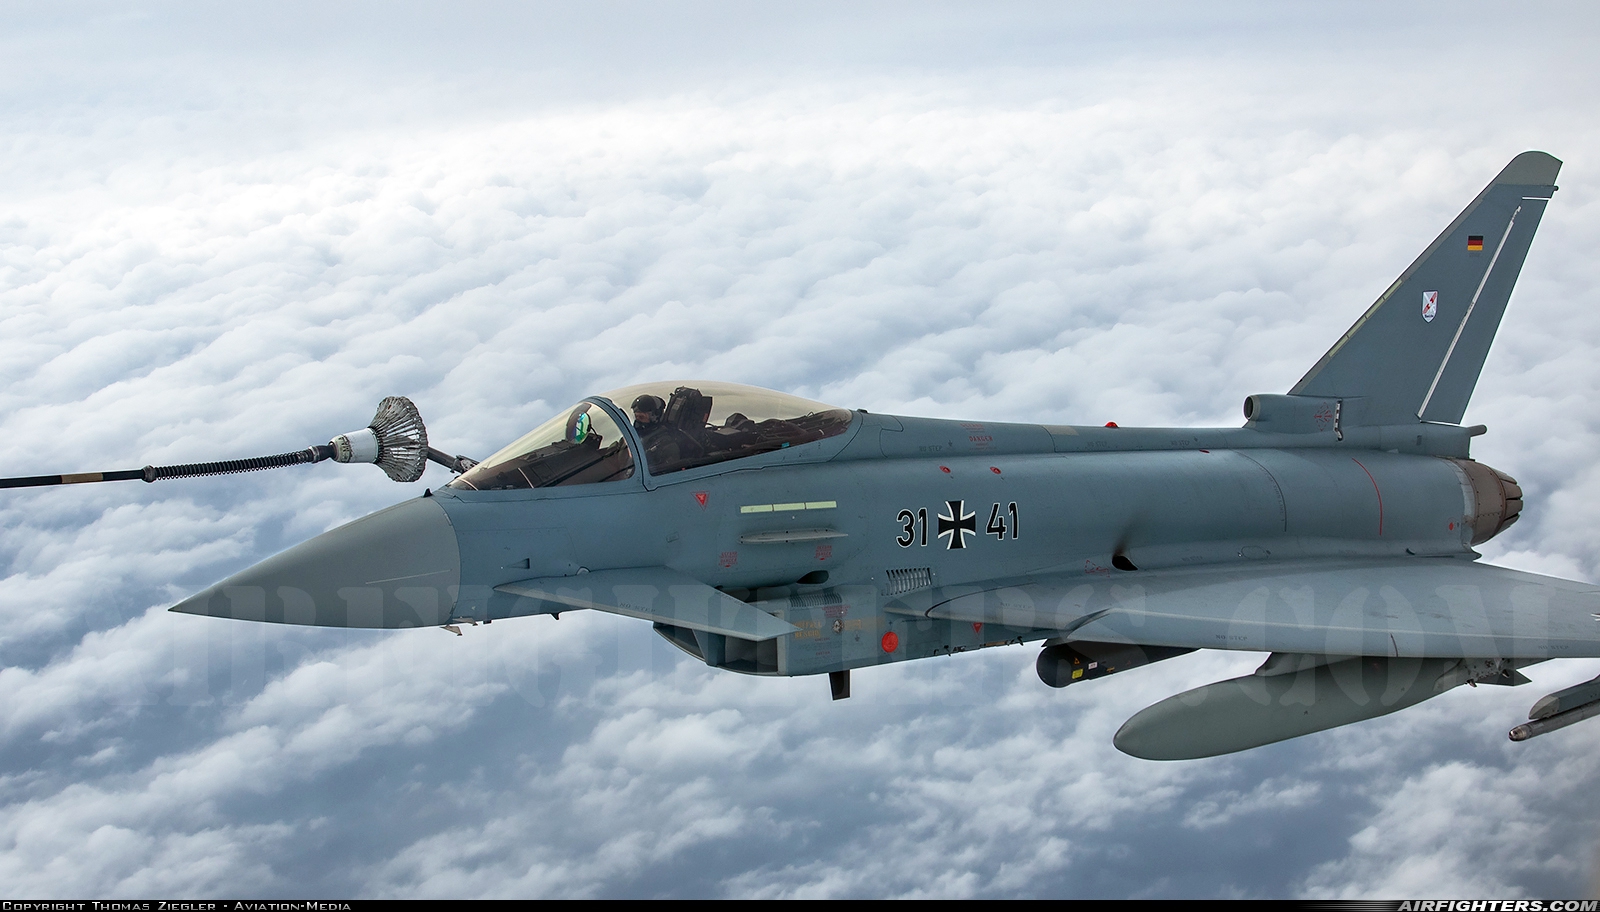 Germany - Air Force Eurofighter EF-2000 Typhoon S 31+41 at North Sea, International Airspace